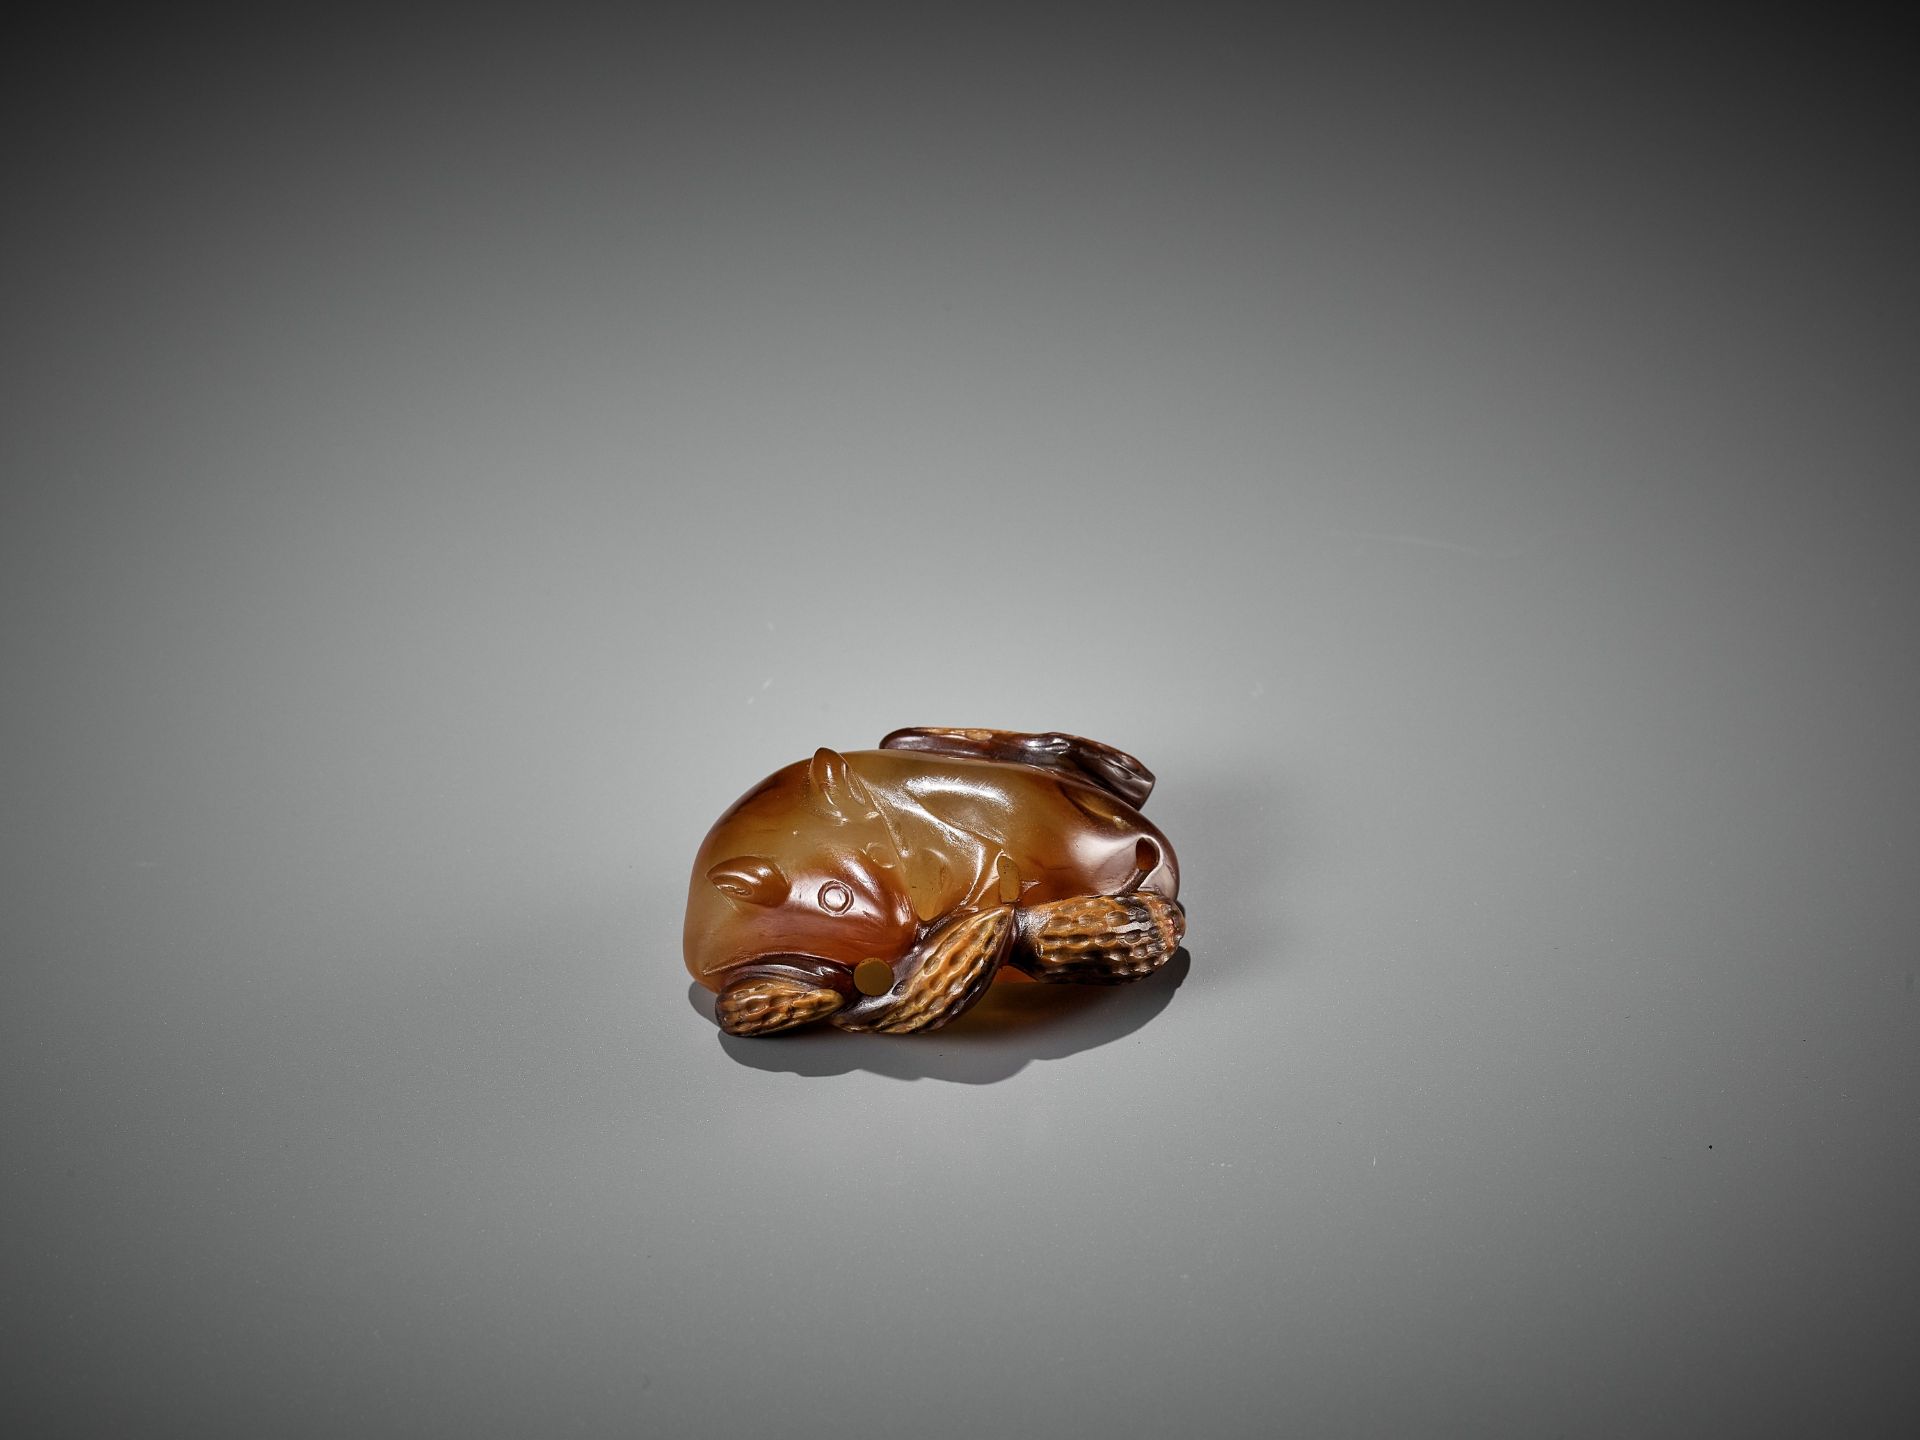 AN AGATE PENDANT OF A SQUIRREL WITH PEANUTS, 18TH-19TH CENTURY - Image 8 of 14